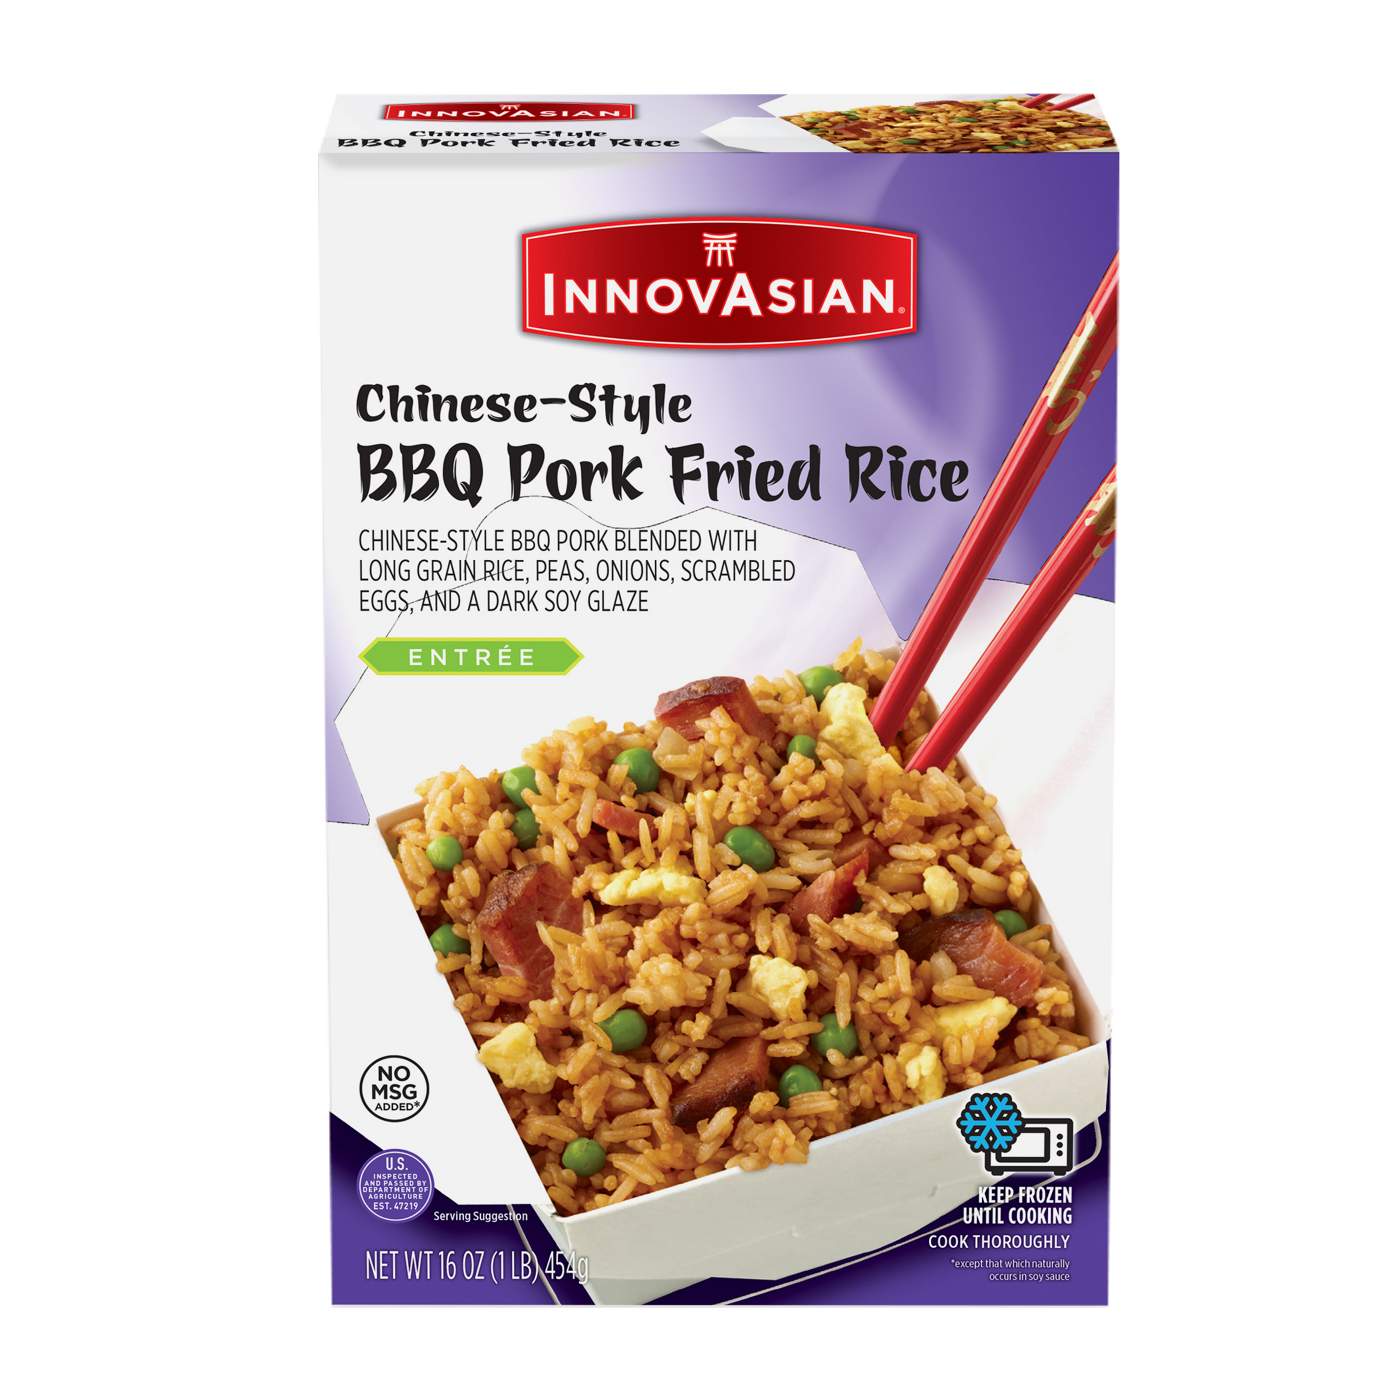 InnovAsian Frozen Chinese-Style BBQ Pork Fried Rice; image 1 of 11